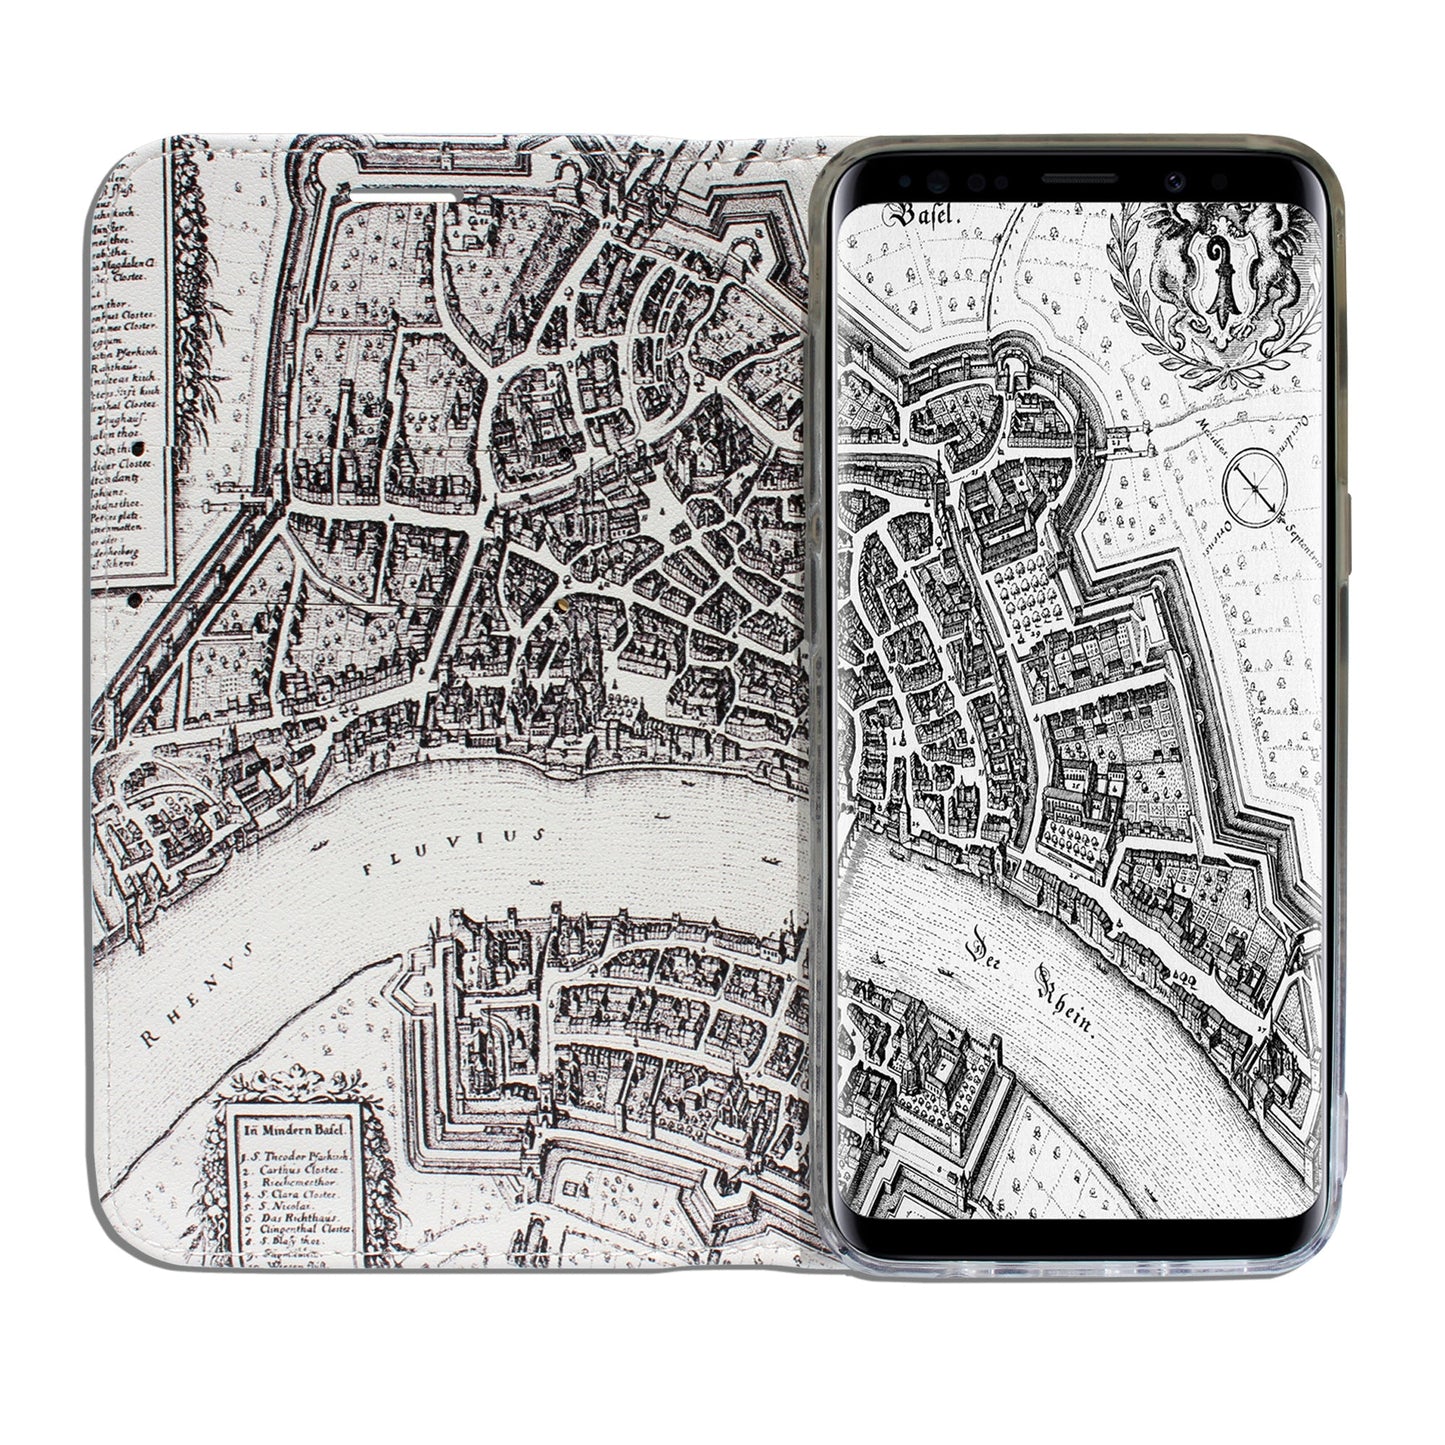 Basel Merian Panorama Case for Samsung Galaxy S10 Plus